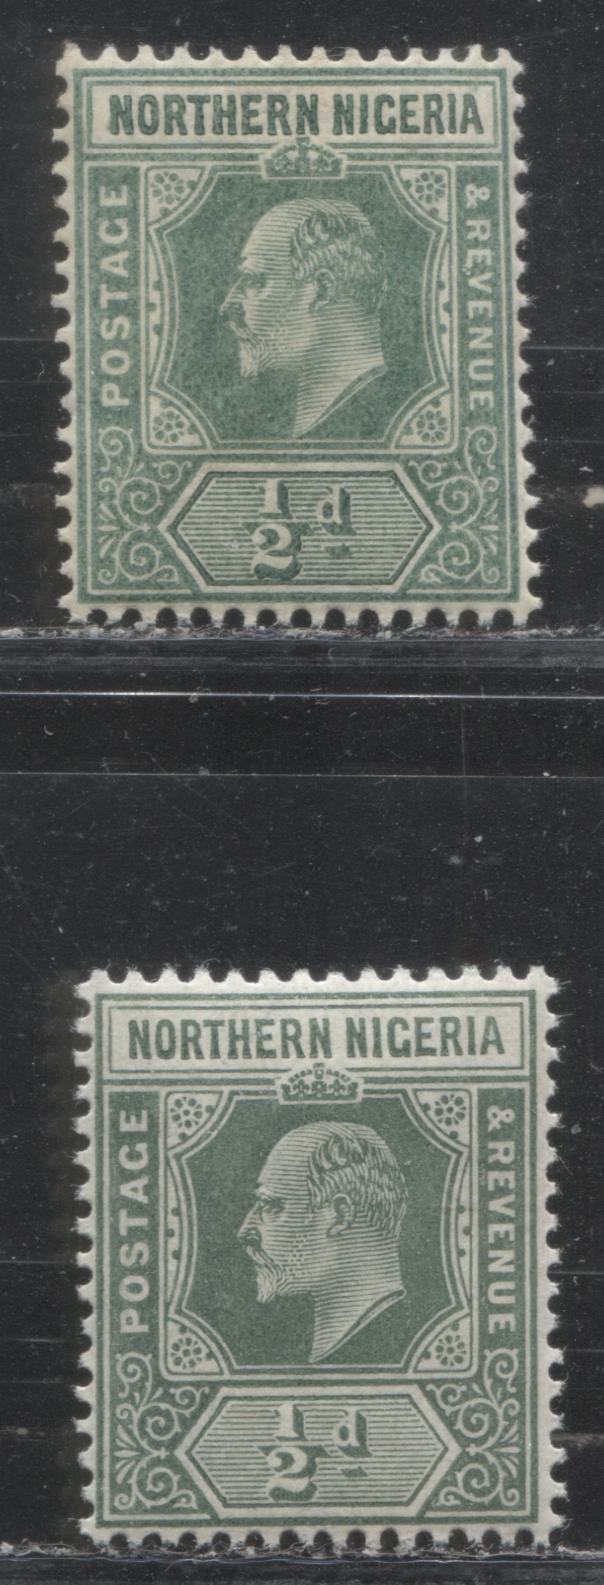 Lot 108 Northern Nigeria SG#28 1/2d Dull Green & Green and Deep Green King Edward VII 1909-1910 New Colours Imperium Keyplate Issue, Two VFNH Examples, On Ordinary Paper, 364,680 Issued, SG Cat. 4 GBP = Approximately $6.8 For Fine OG, Est. $12